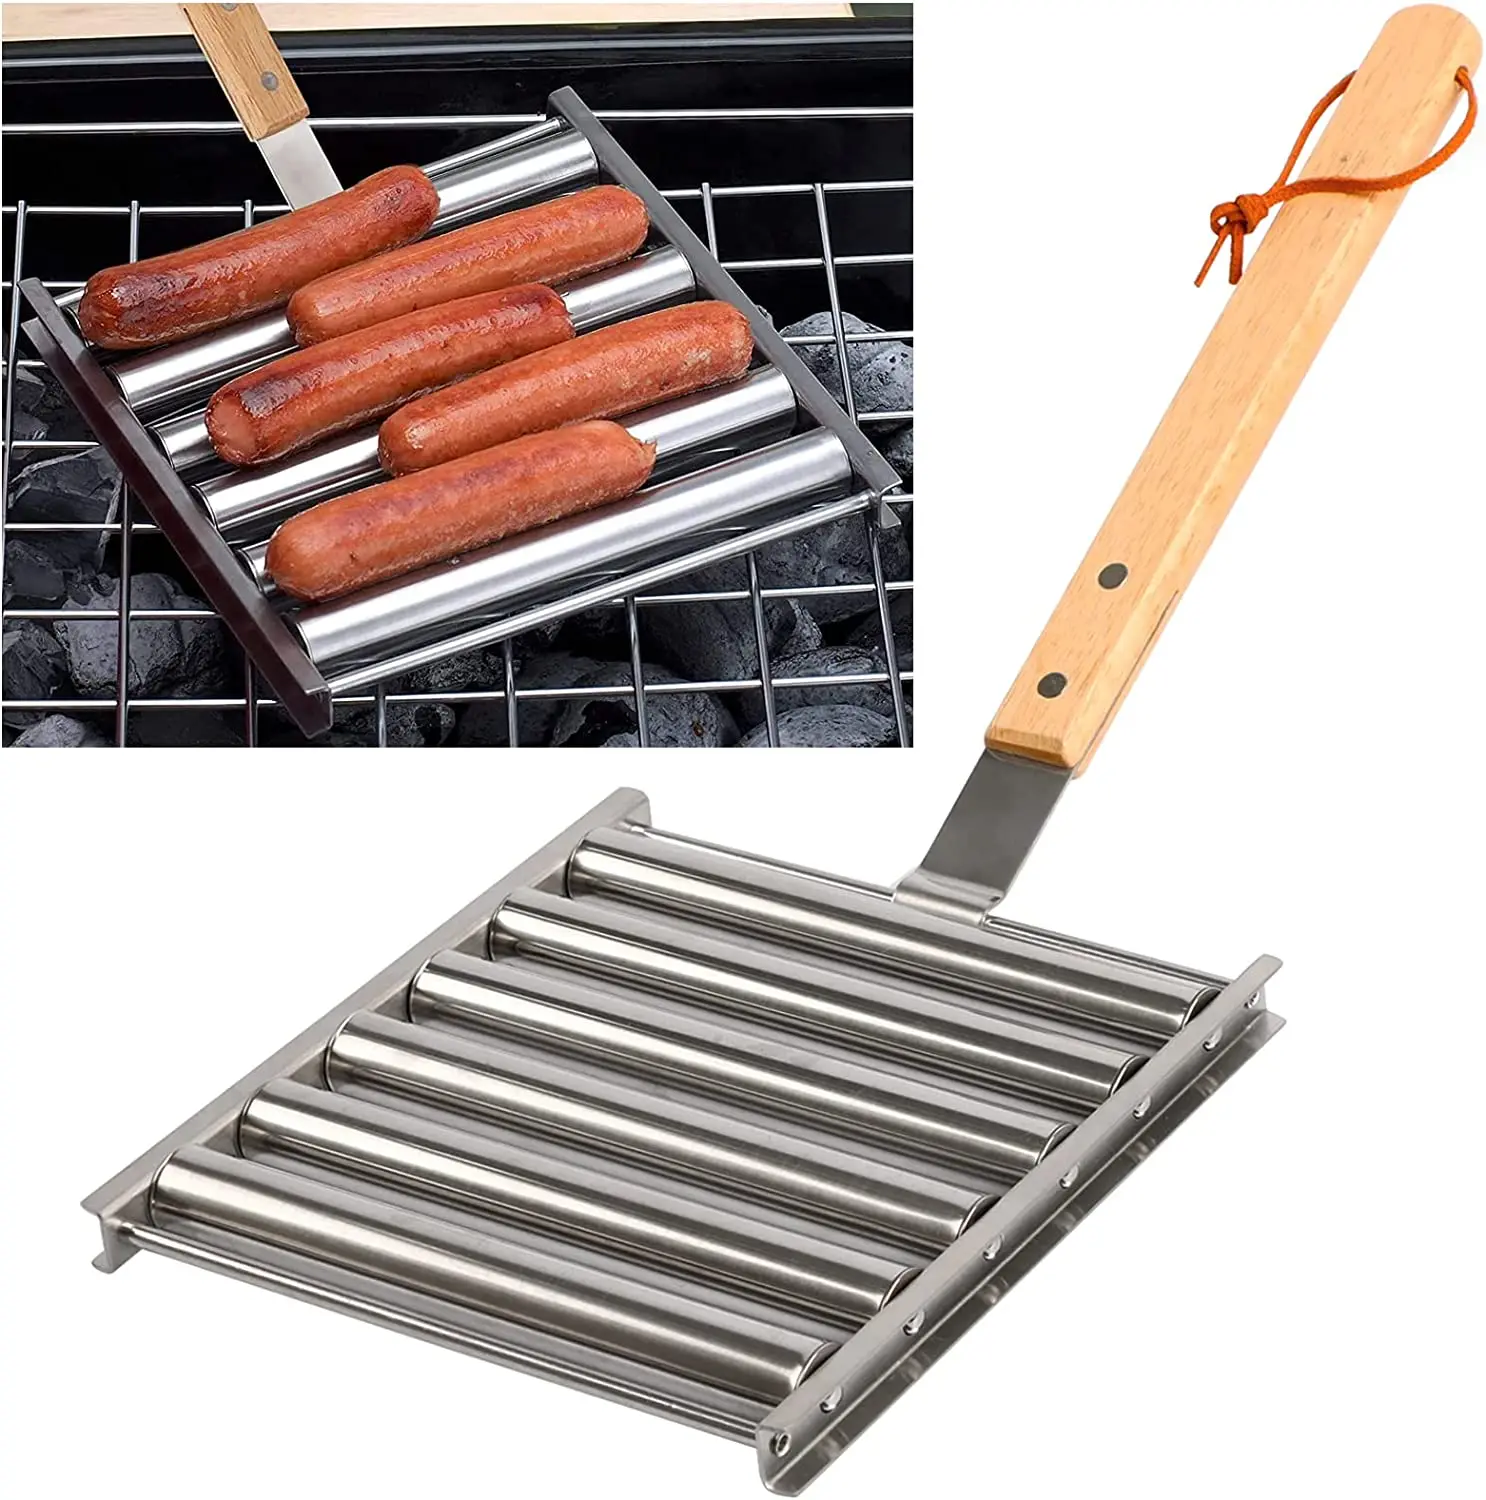 KAYCROWN Hot Dog Roller Stainless Steel Sausage Roller Rack with Extra Long Wood Handle, BBQ Hot Dog Griller for Evenly Cooked